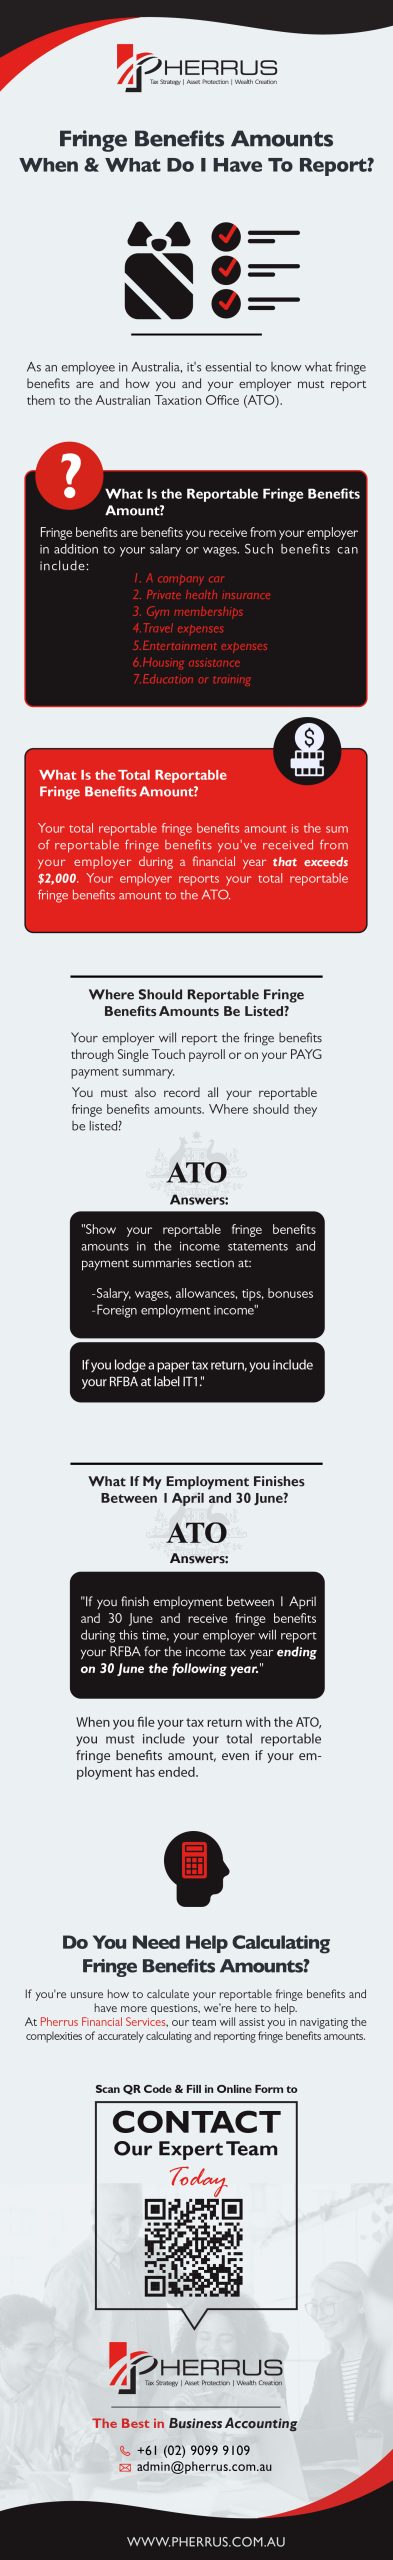 Fringe Benefits Amounts: When And What Do I Have To Report Infographic